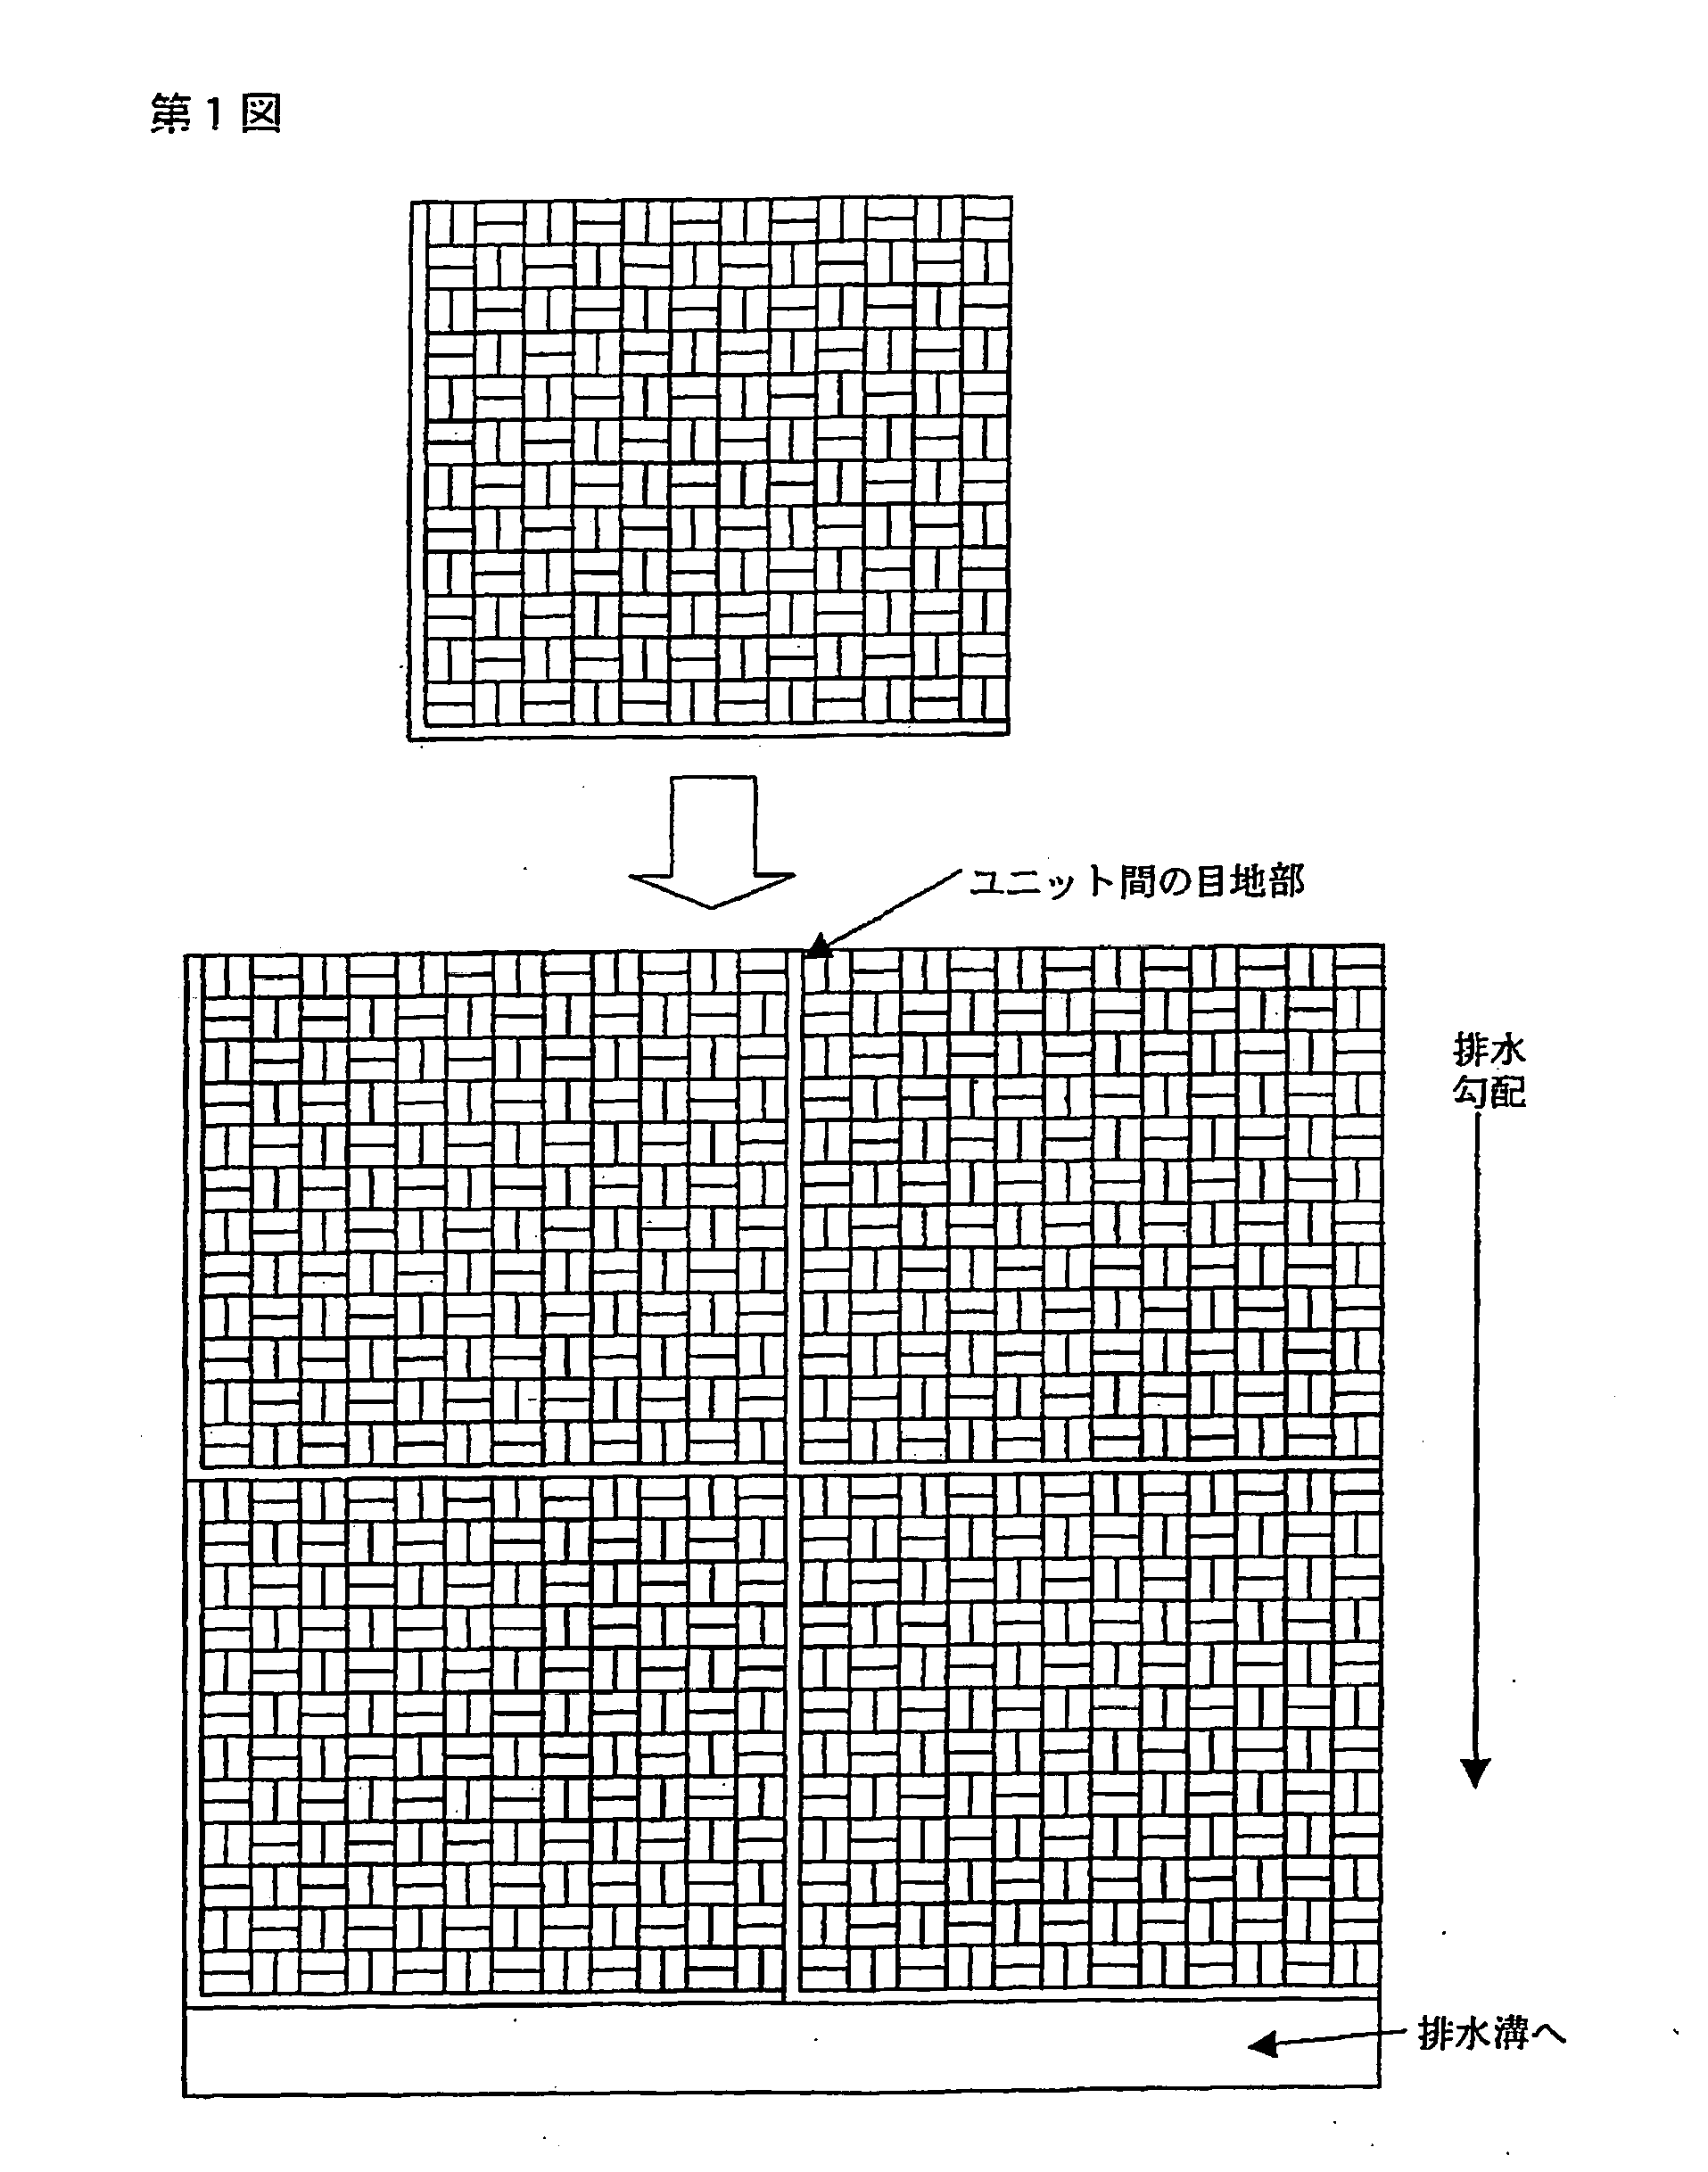 Building material and method of manufacturing the material